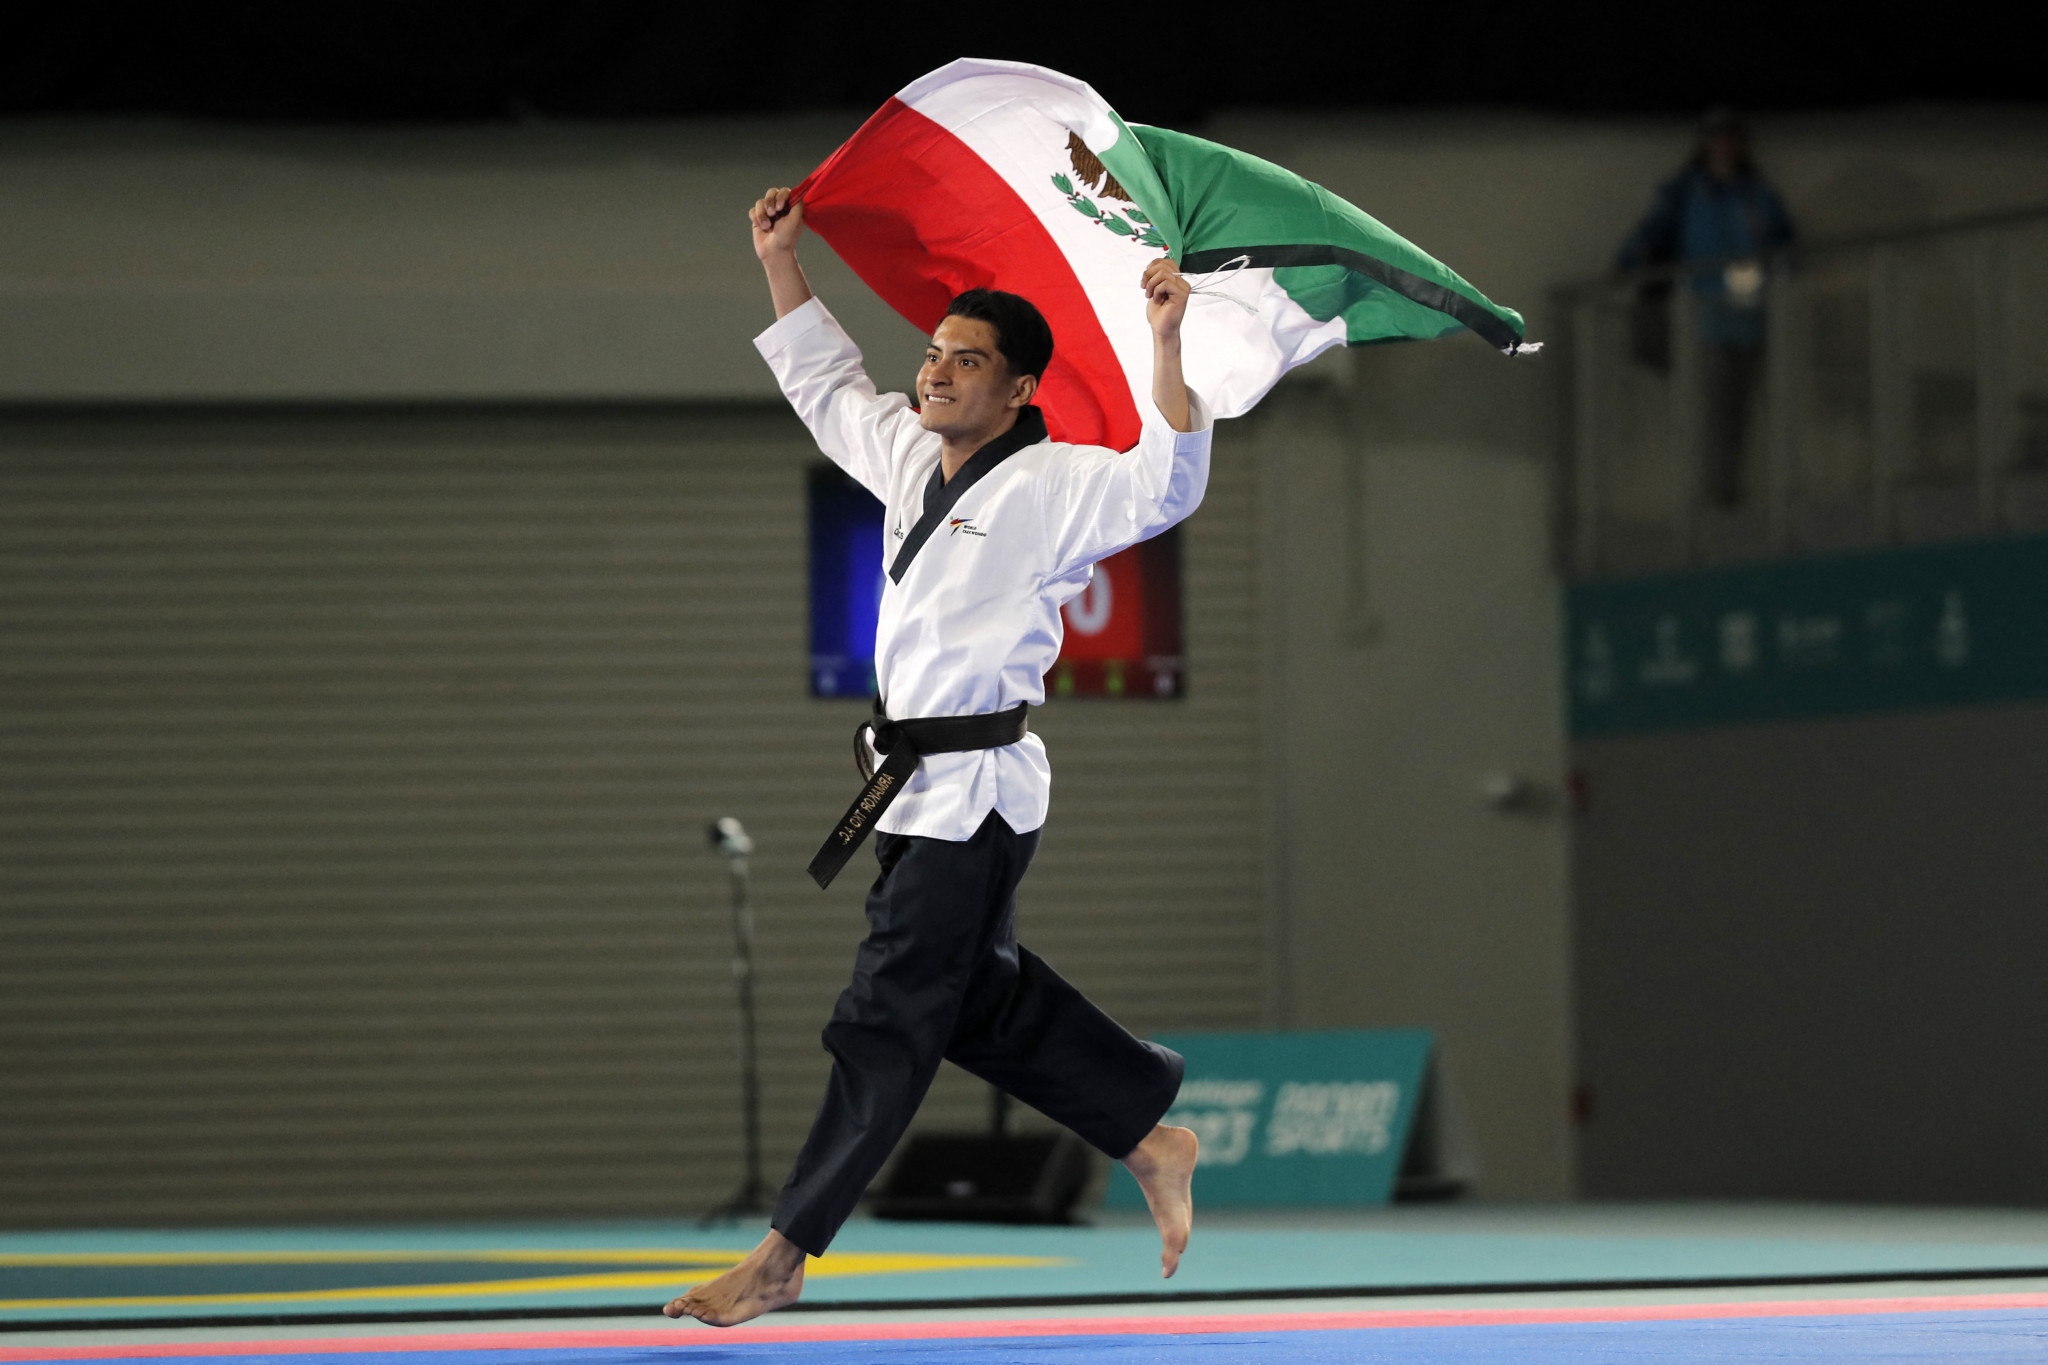 Mexico's William Arroyo holds the national flag after defeating Nicaragua's Elian Ortega to win the taekwondo men's individual poomsae final of the Pan American Games Santiago 2023 © Javier TORRES / AFP